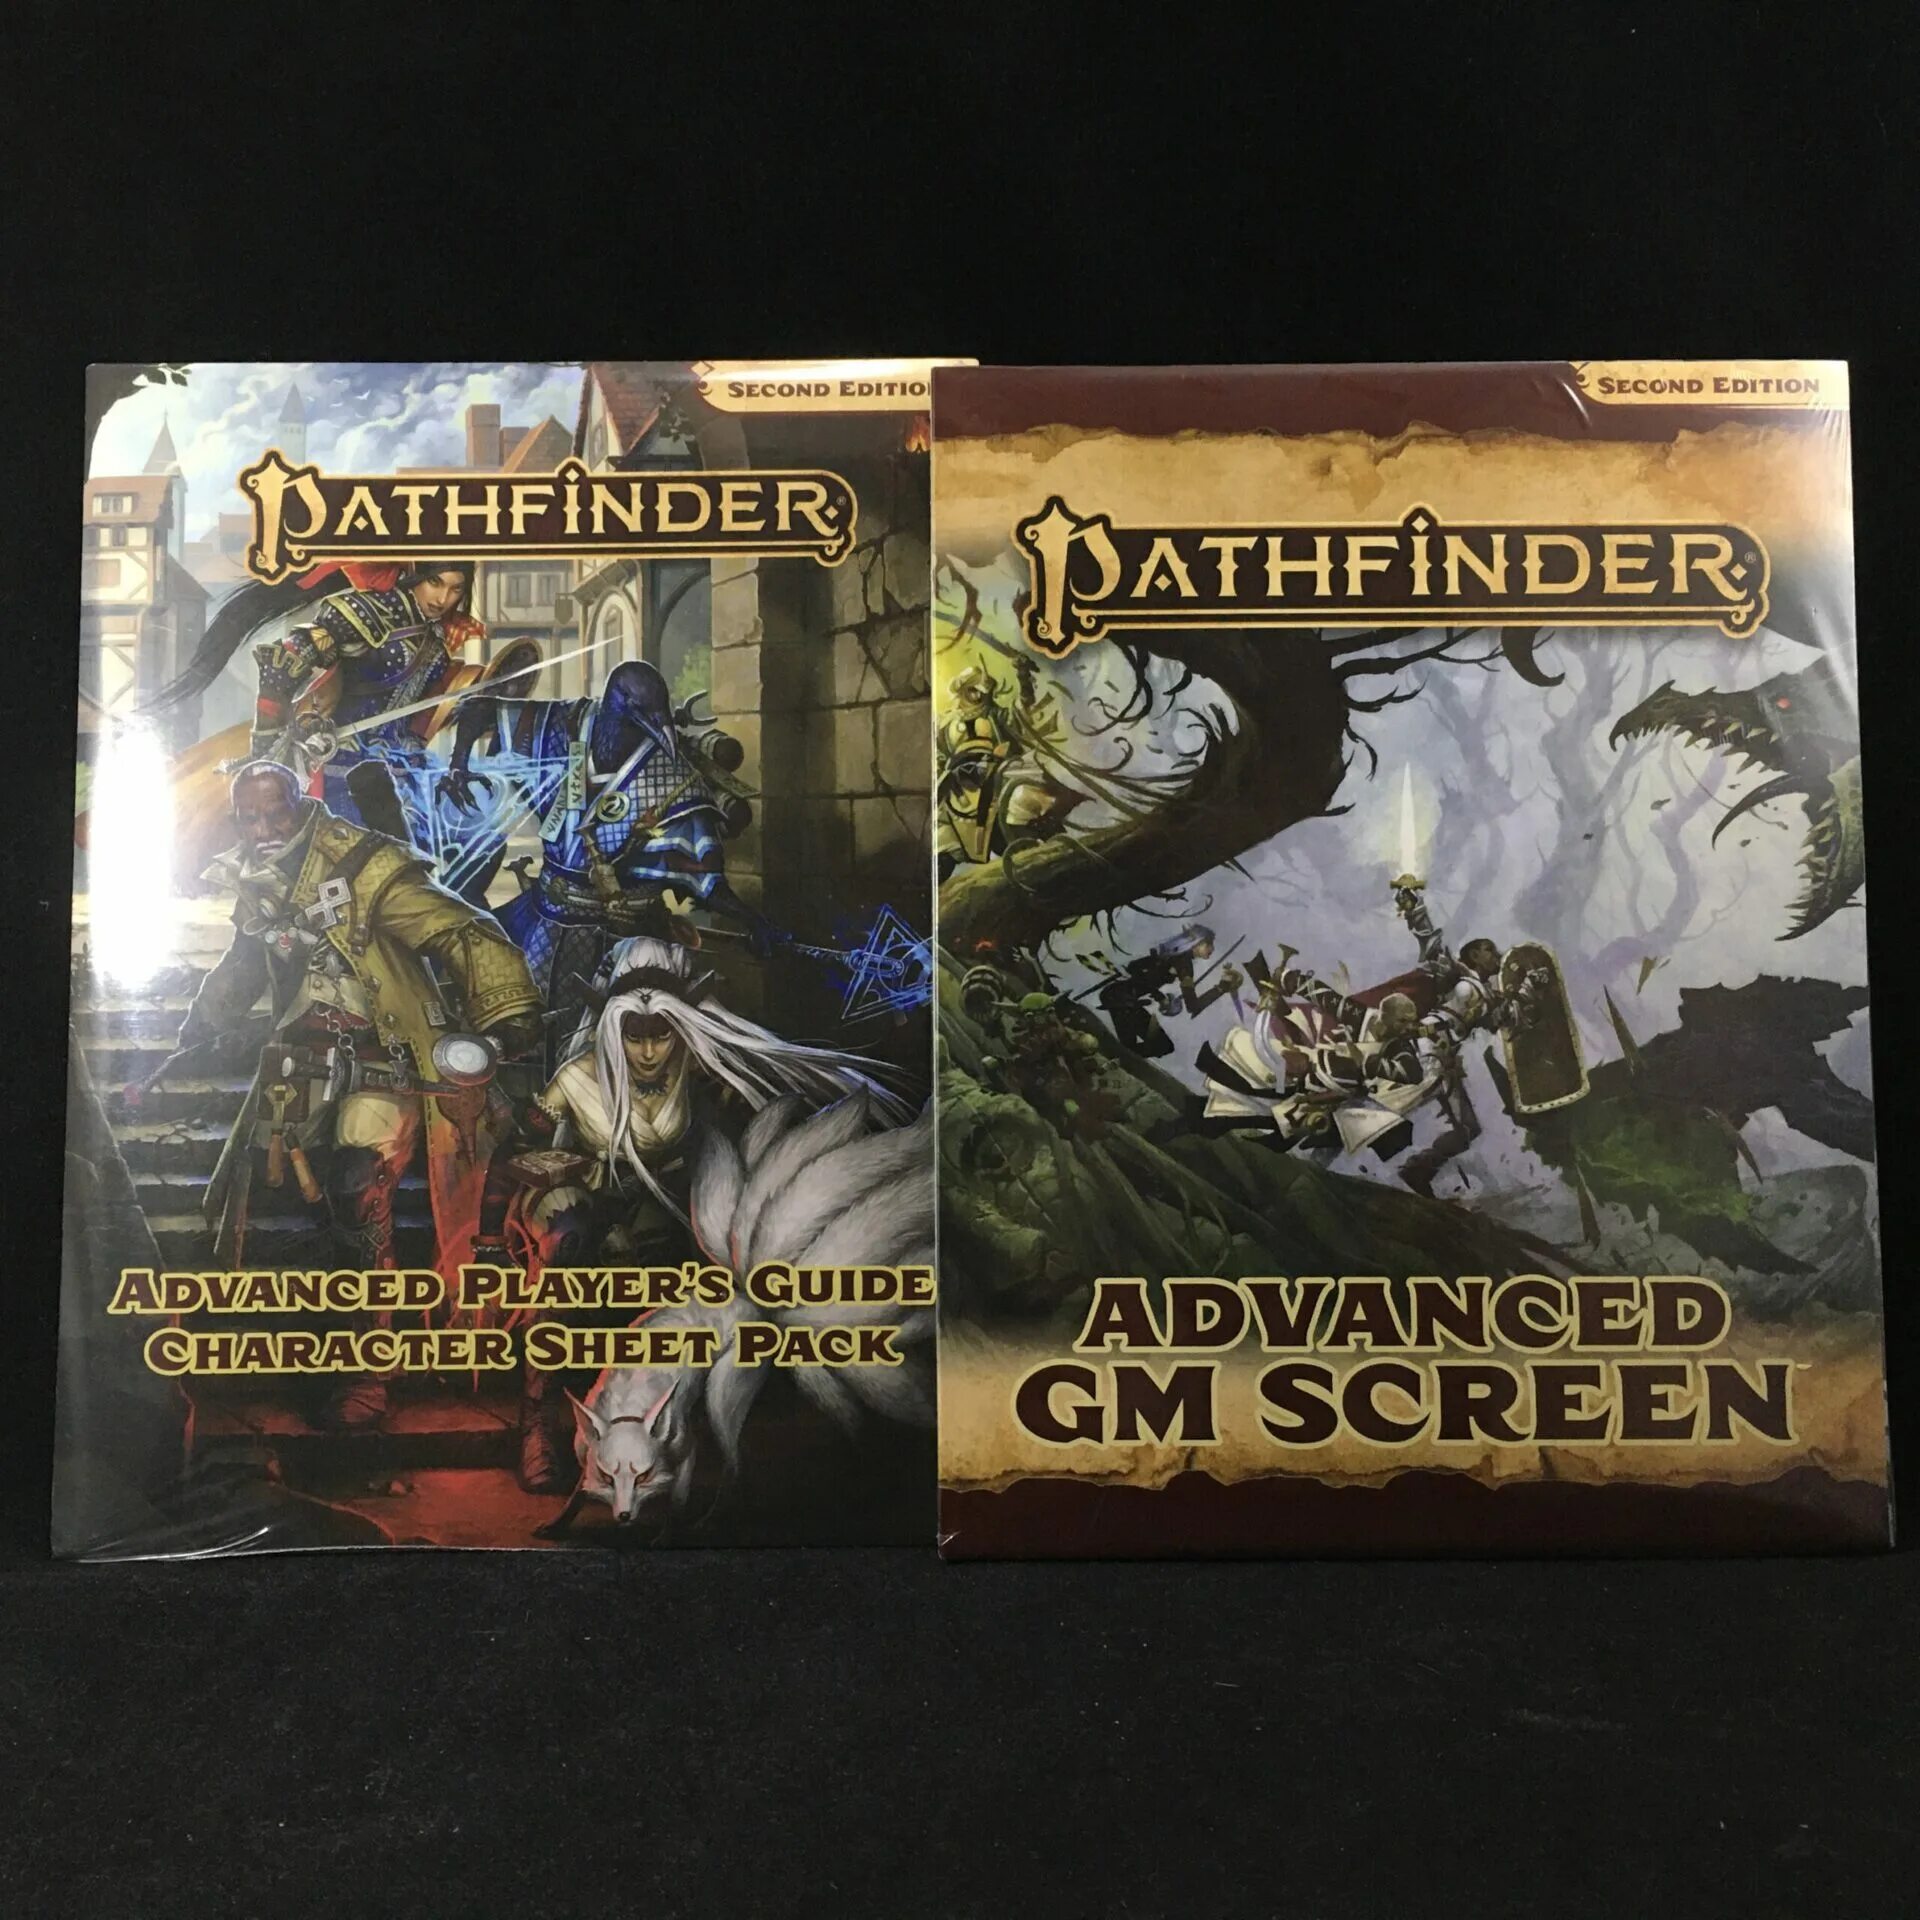 Pathfinder second Edition. Advanced Player's Guide Pathfinder. Pathfinder 2 Pocket Edition. Advanced Player's Guide PG. 13 Pathfinder. Advanced player